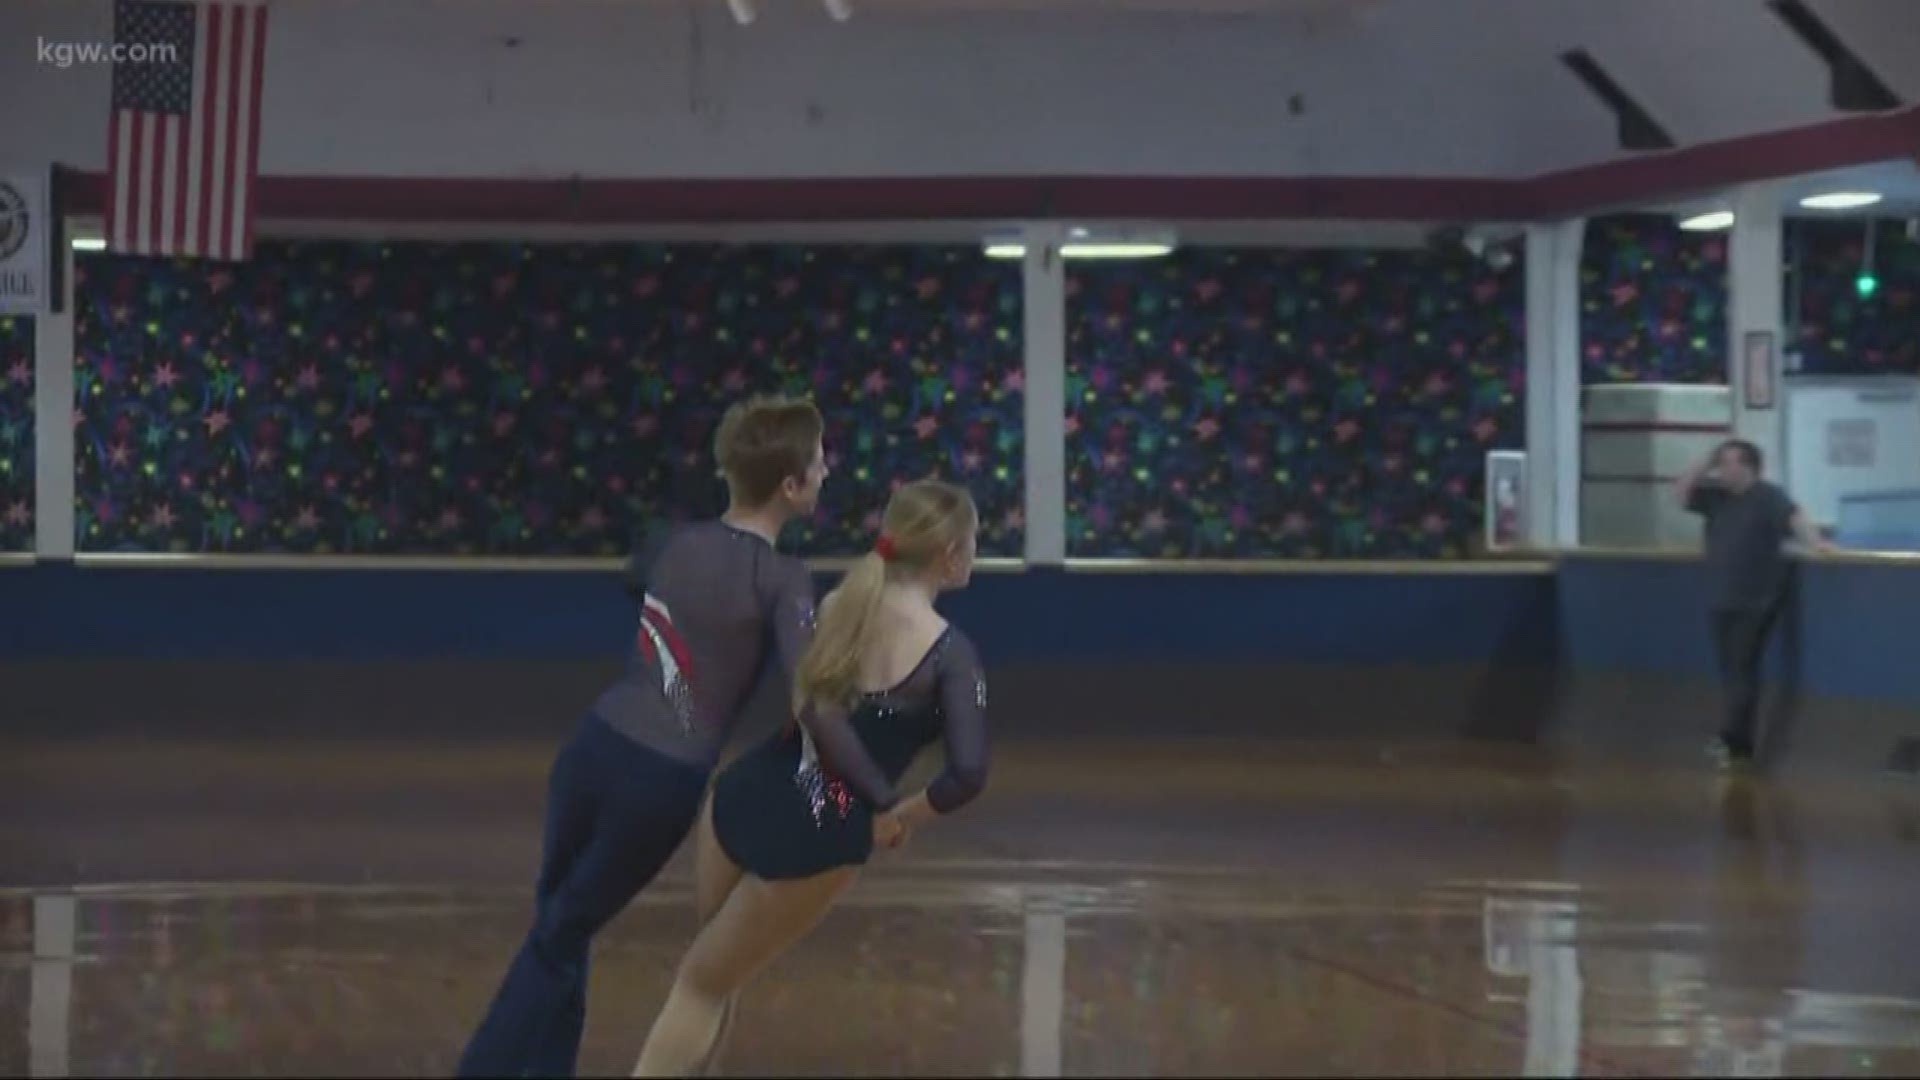 A pair of roller skaters are getting ready to compete on a national stage.